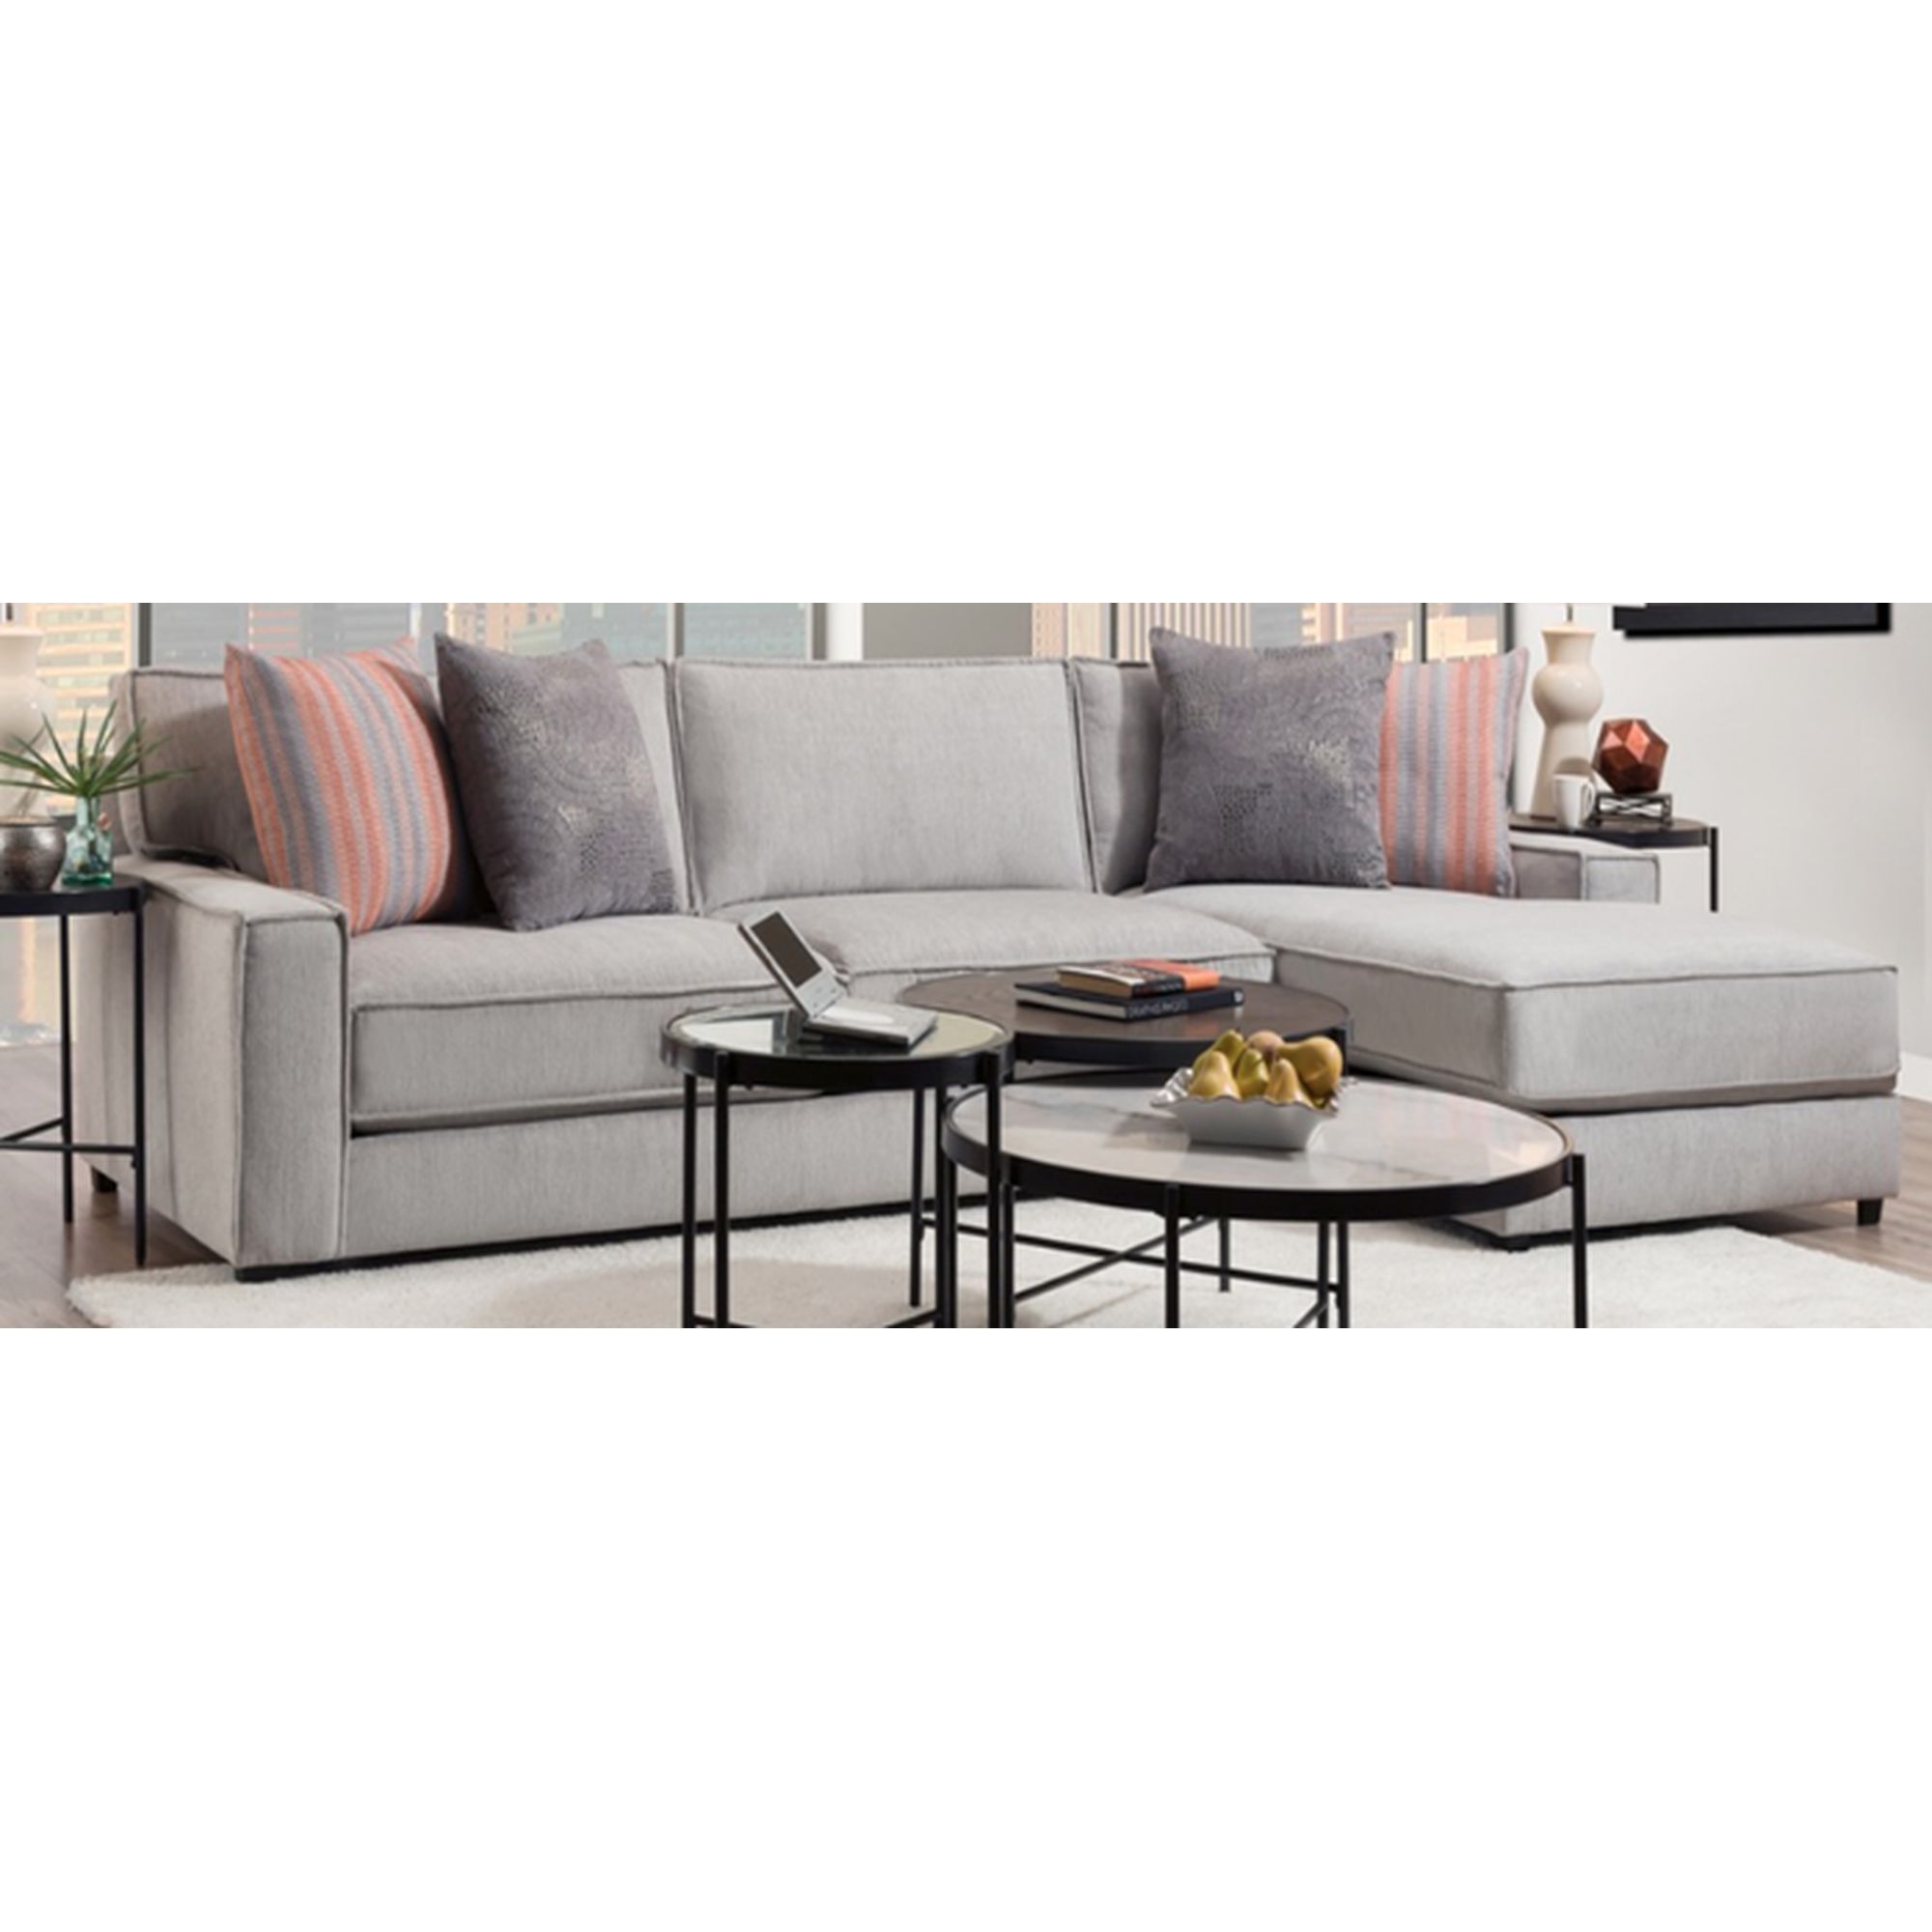 572 - Sectional RHF Chaise in Candor Ash with Marlow Orange and Roulette Smoke Pillows